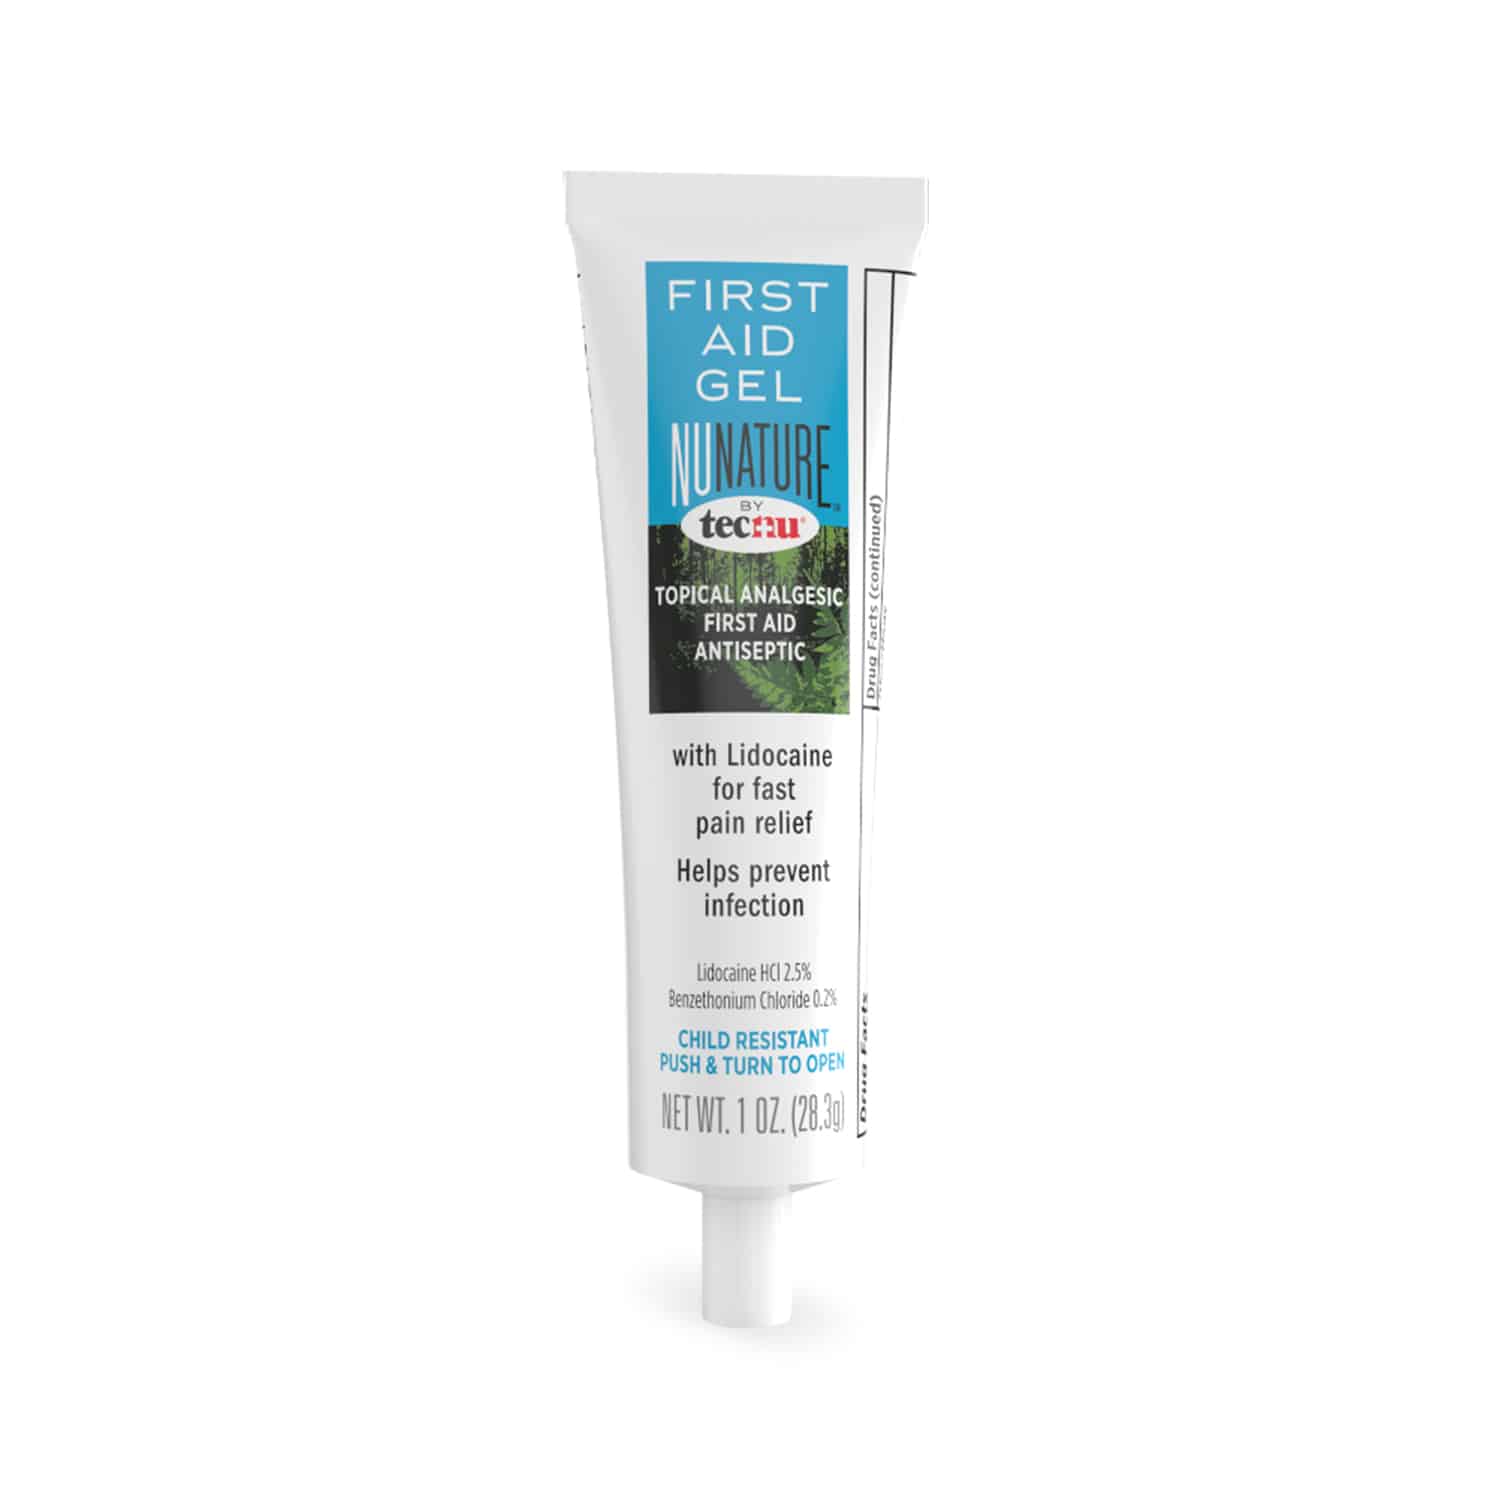 NuNature First Aid Gel helps prevent skin infections